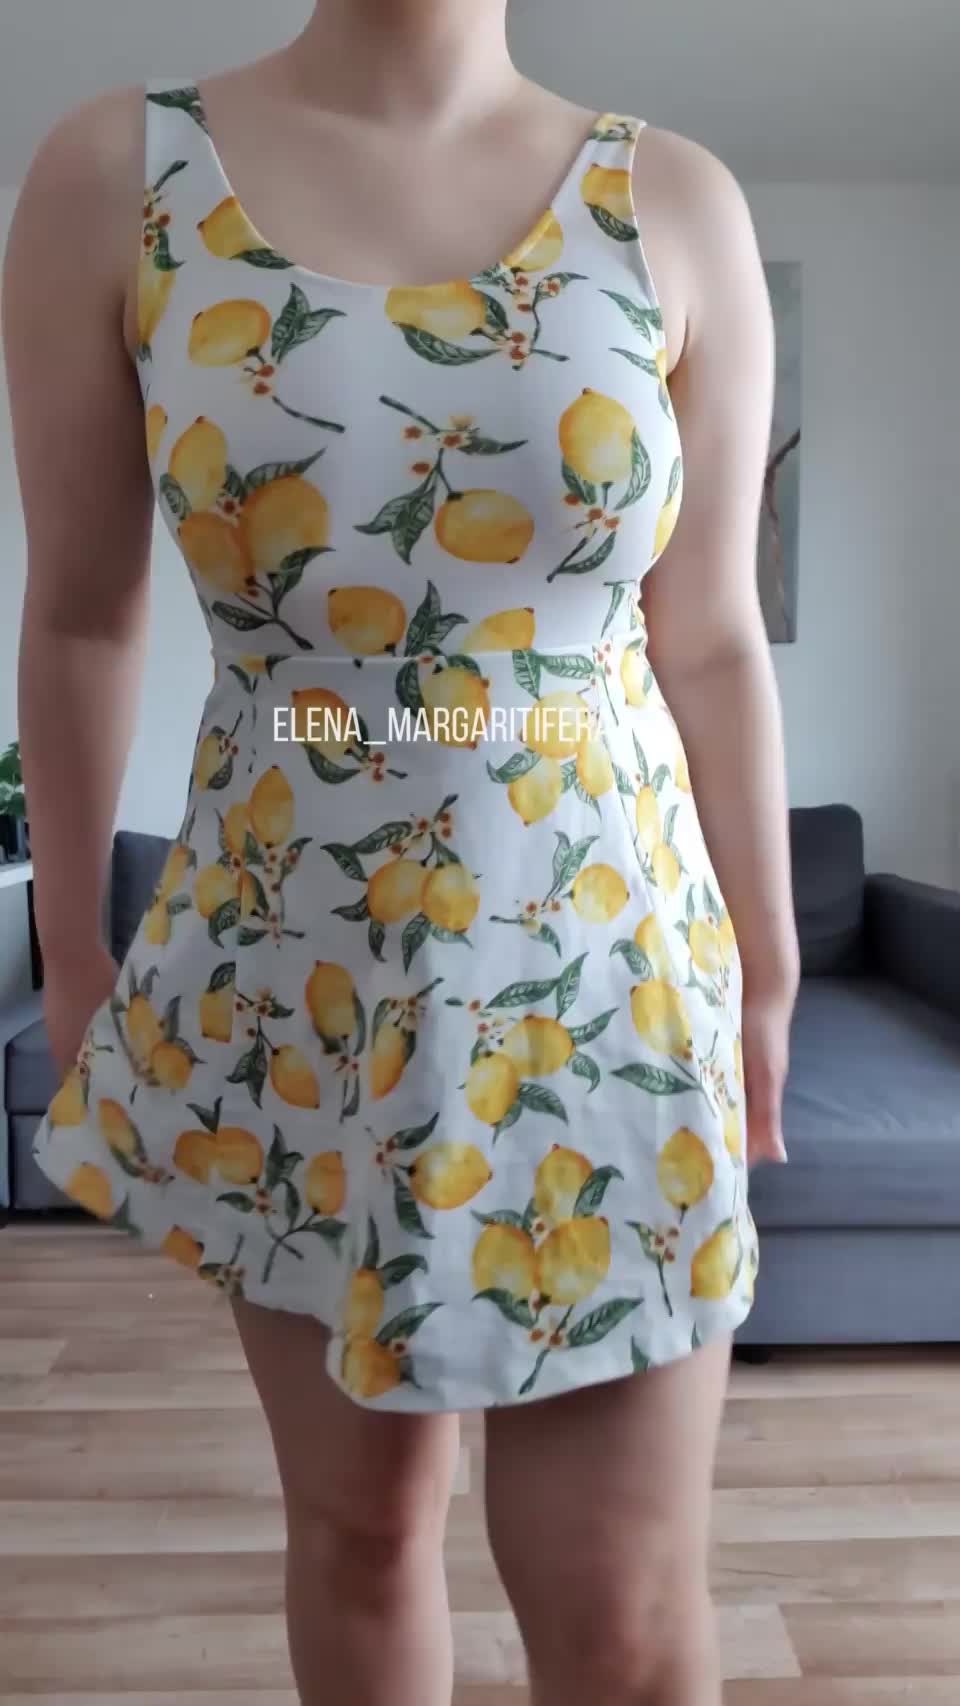 Wearing nothing under my dress means you can fuck me whenever you want : video clip